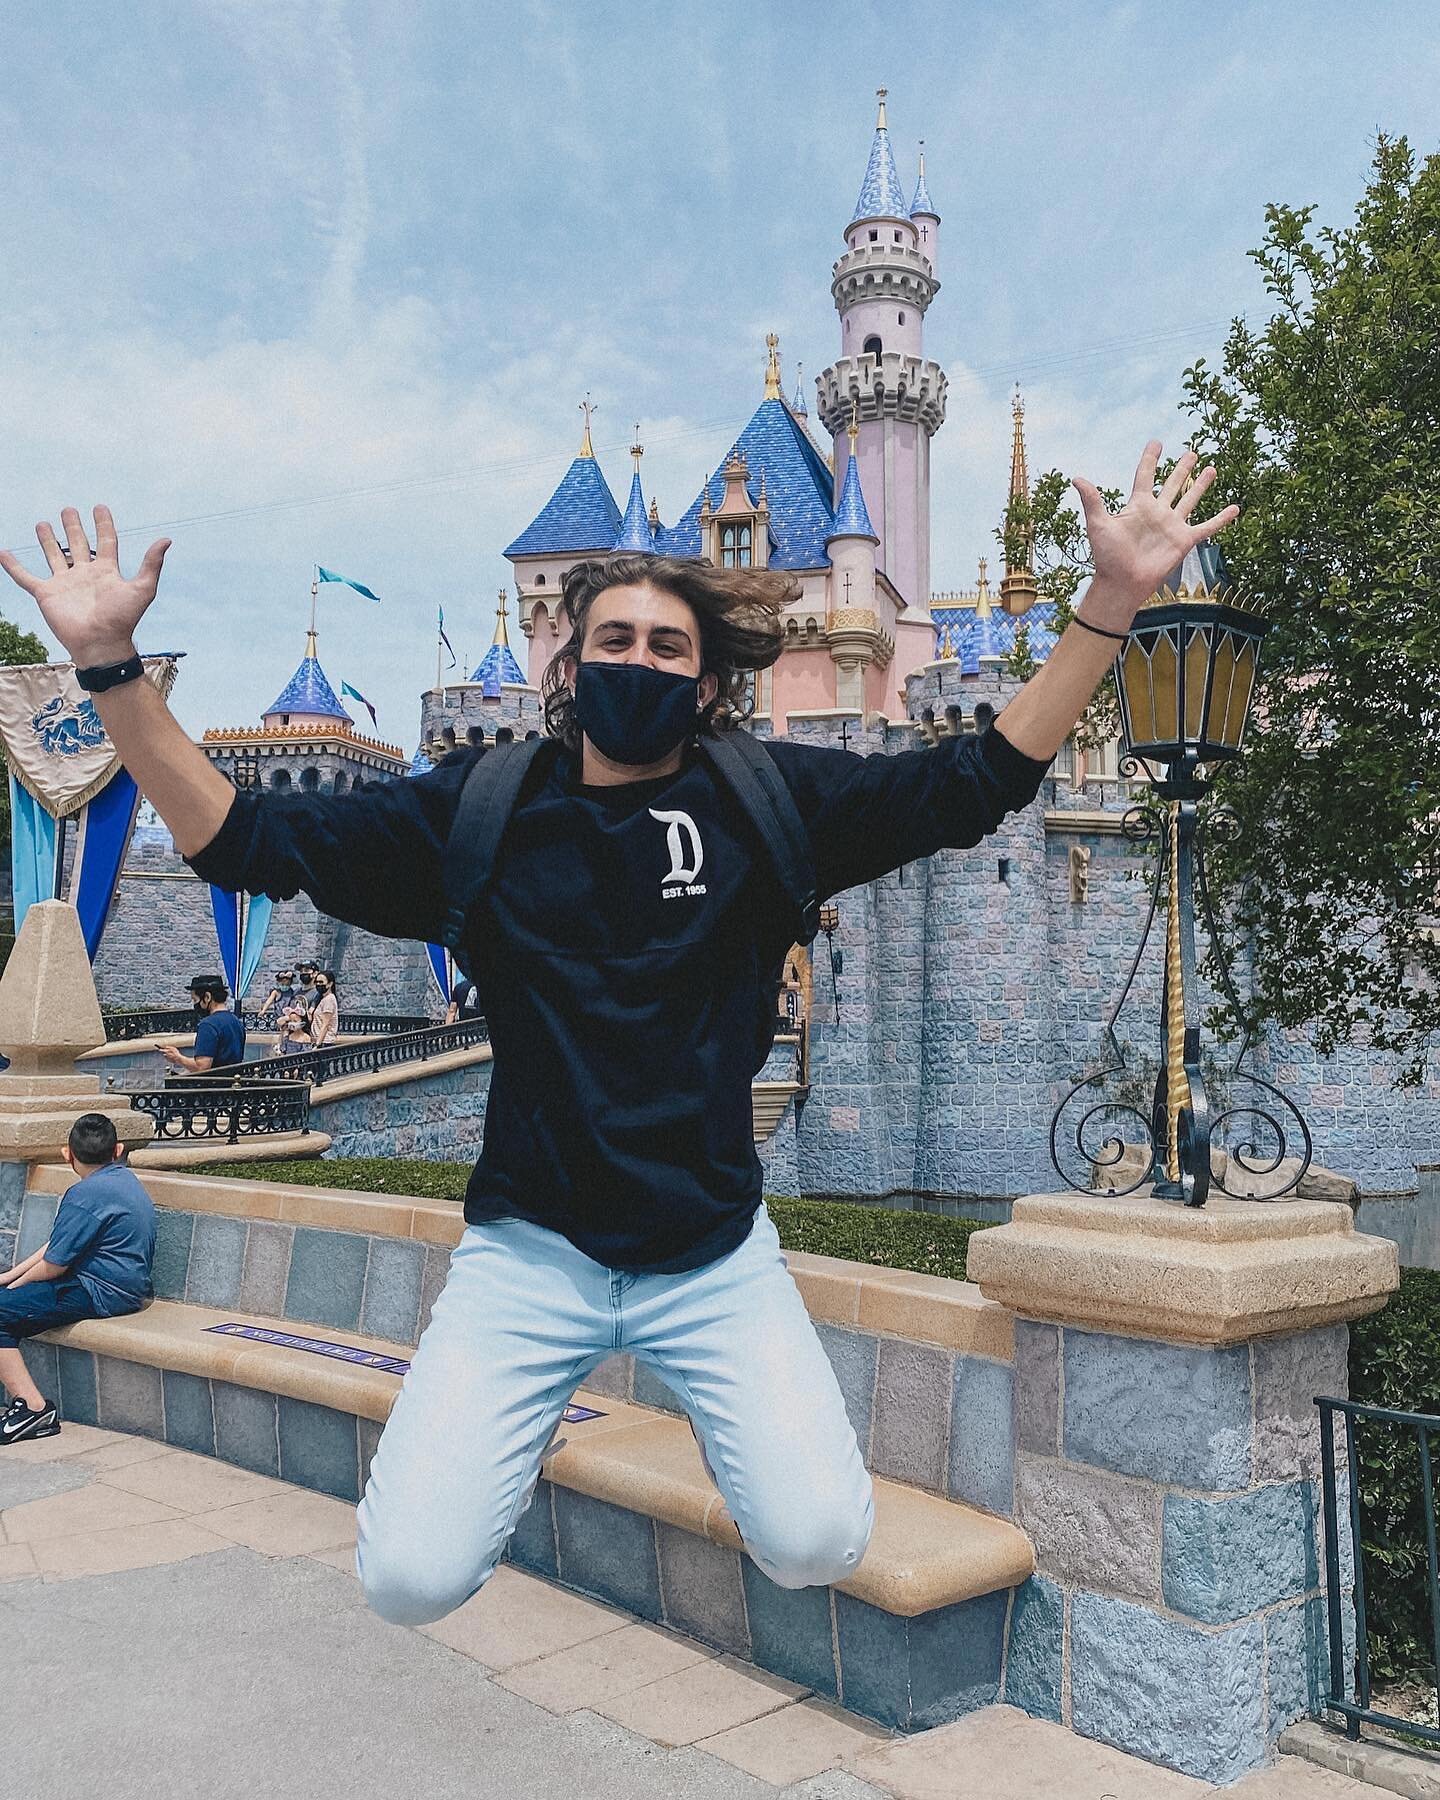 I was literally jumping for joy! This weekend, @disneyland re-opened after their year-long closure and I was fortunate to be there for the first 2 days 🤩

Opening day was on Friday and that involved me waking up at 4AM and driving up with @kenziepea